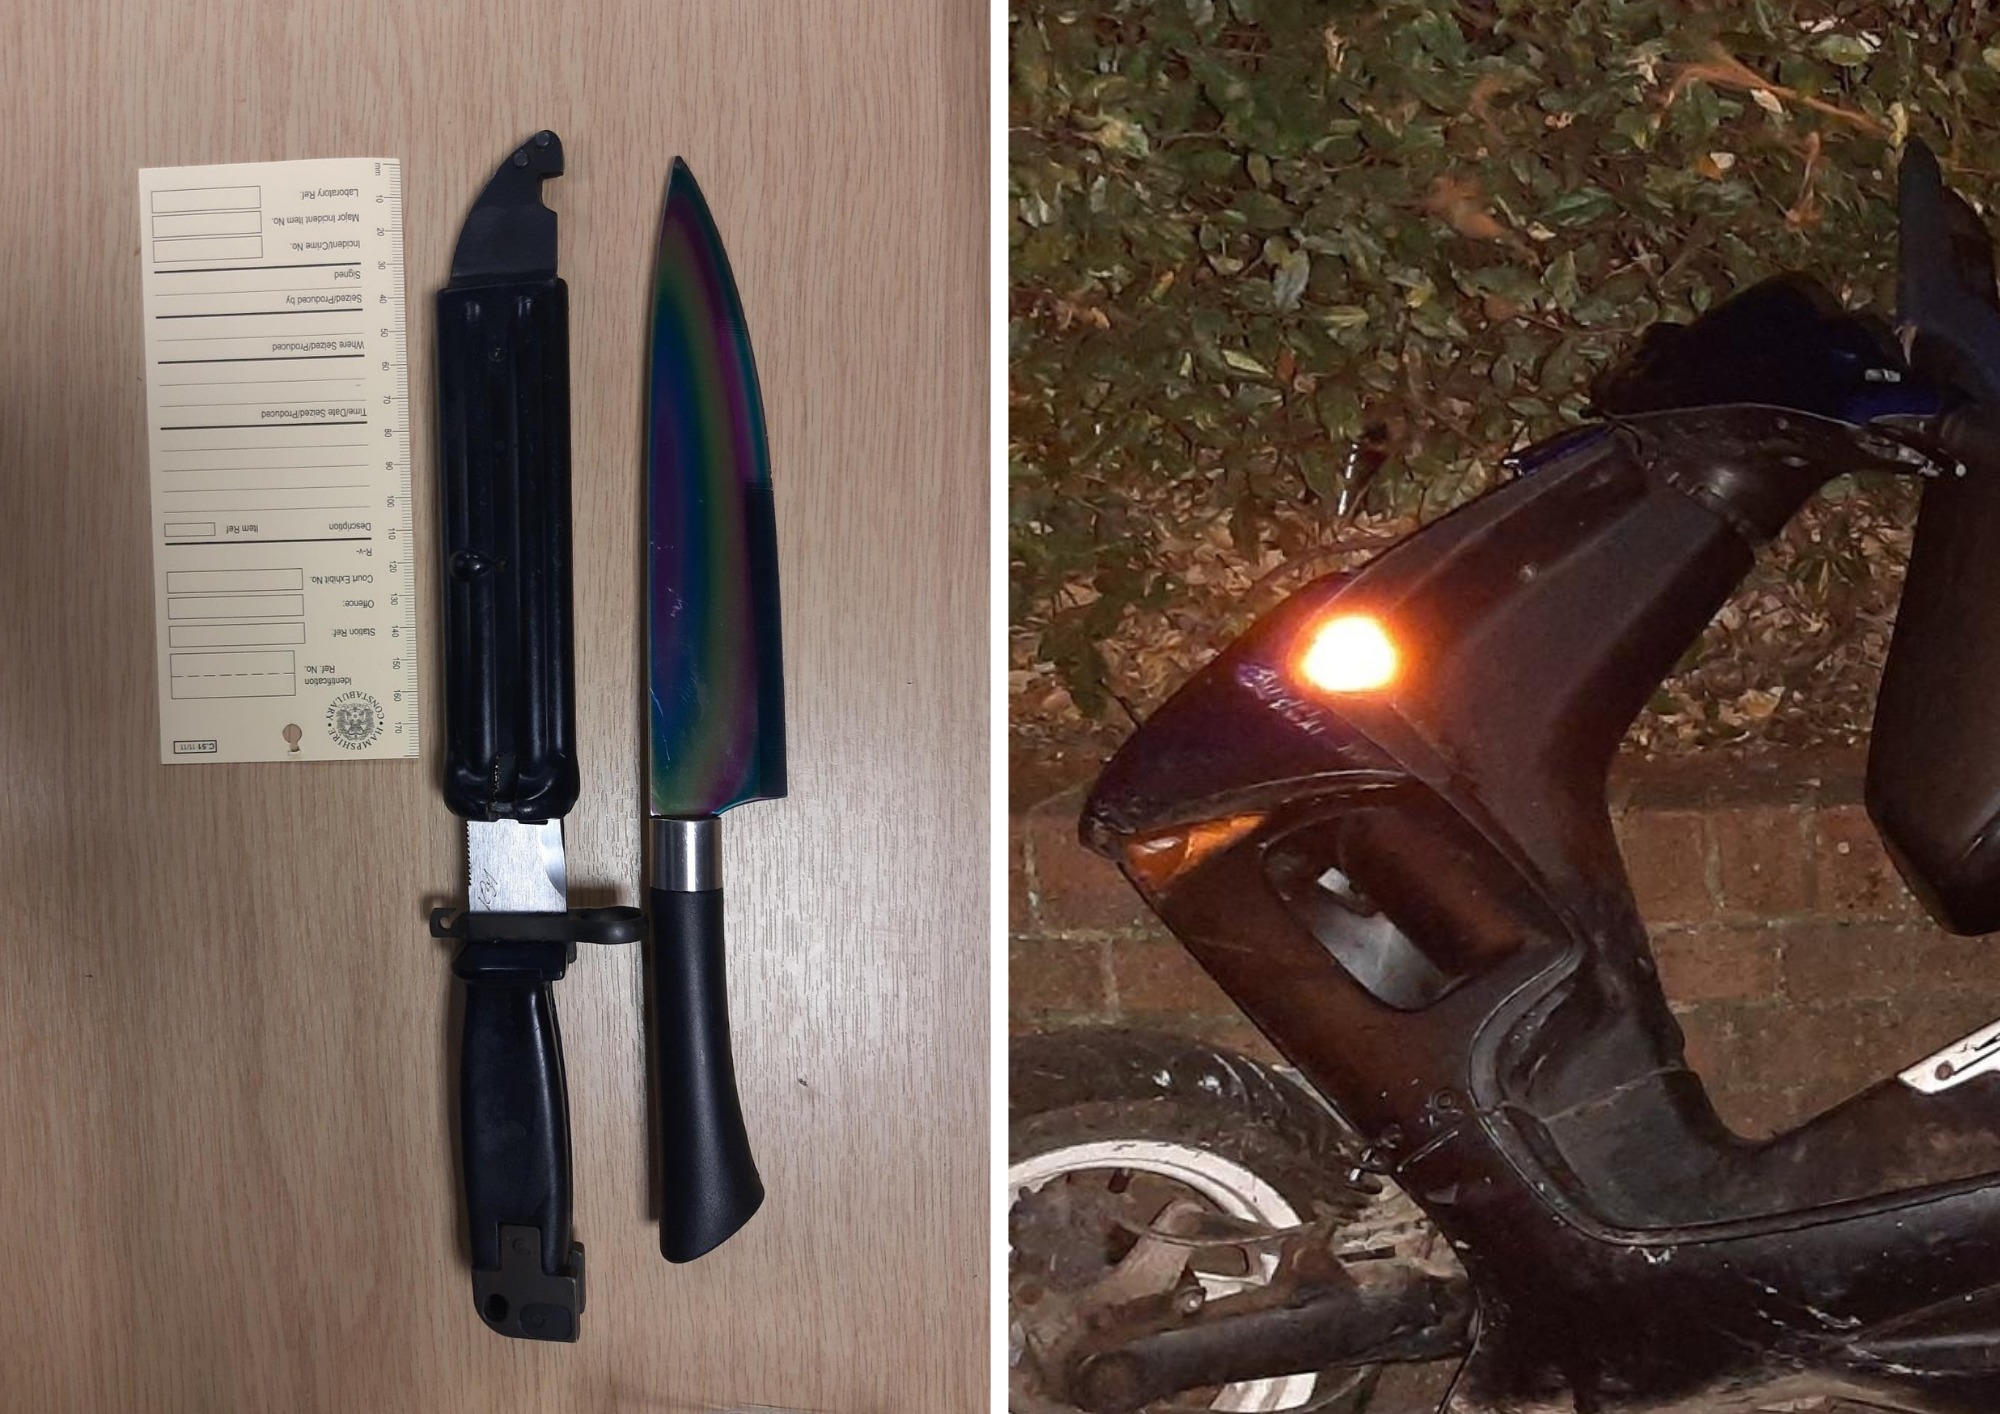 Two knives were seized from a teen in <a href=